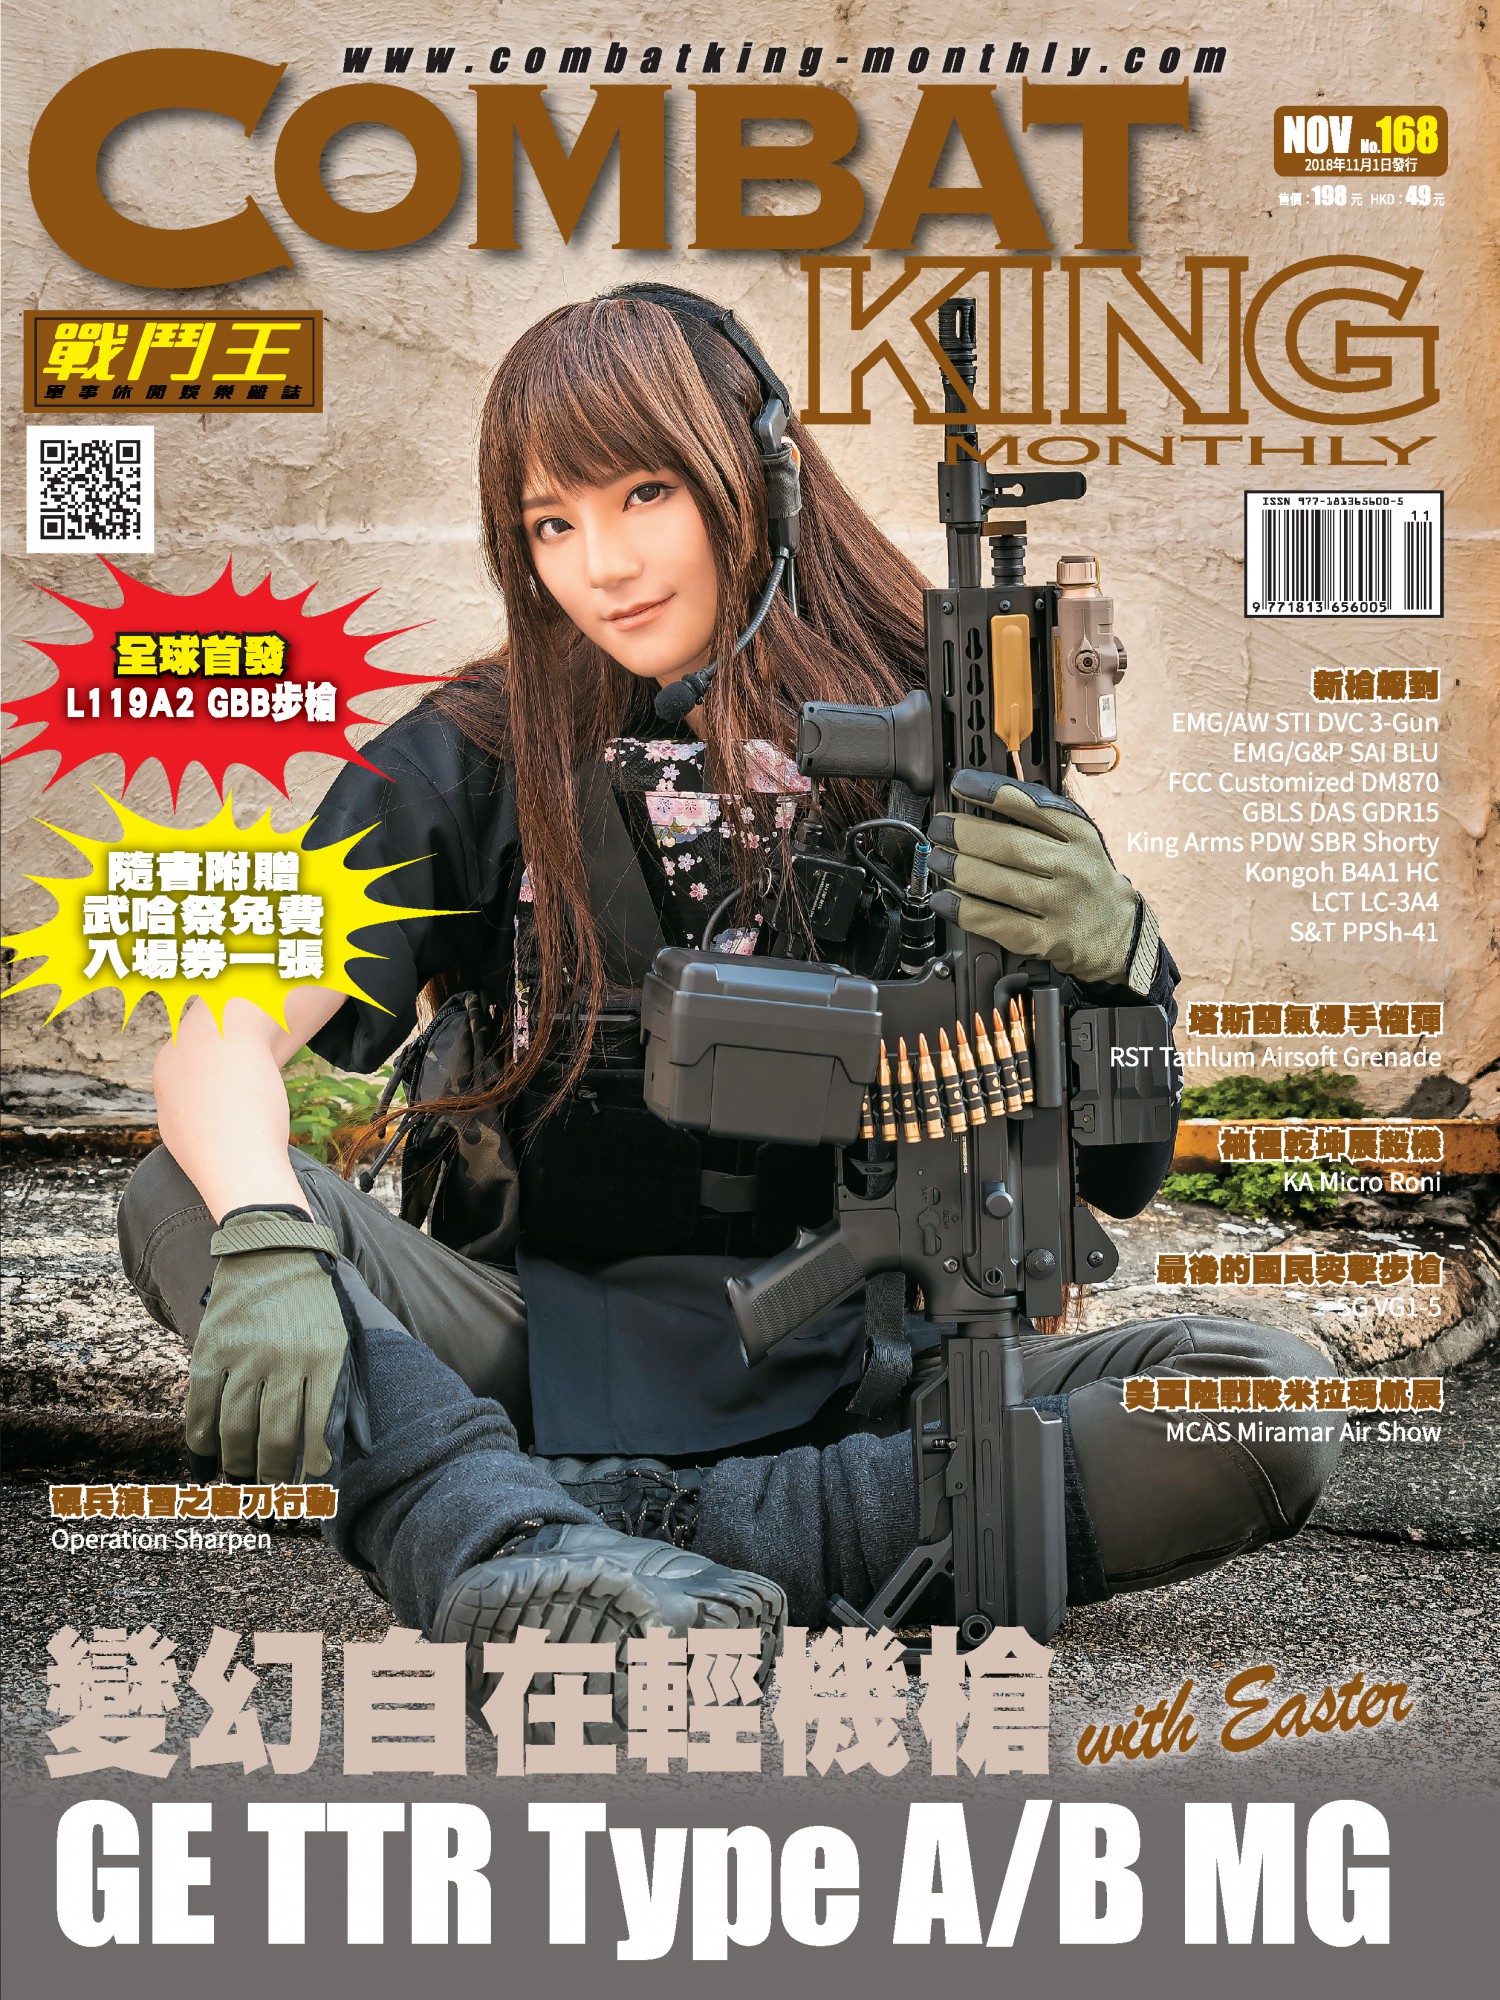 Combat King Monthly Issue168 Nov. 2018